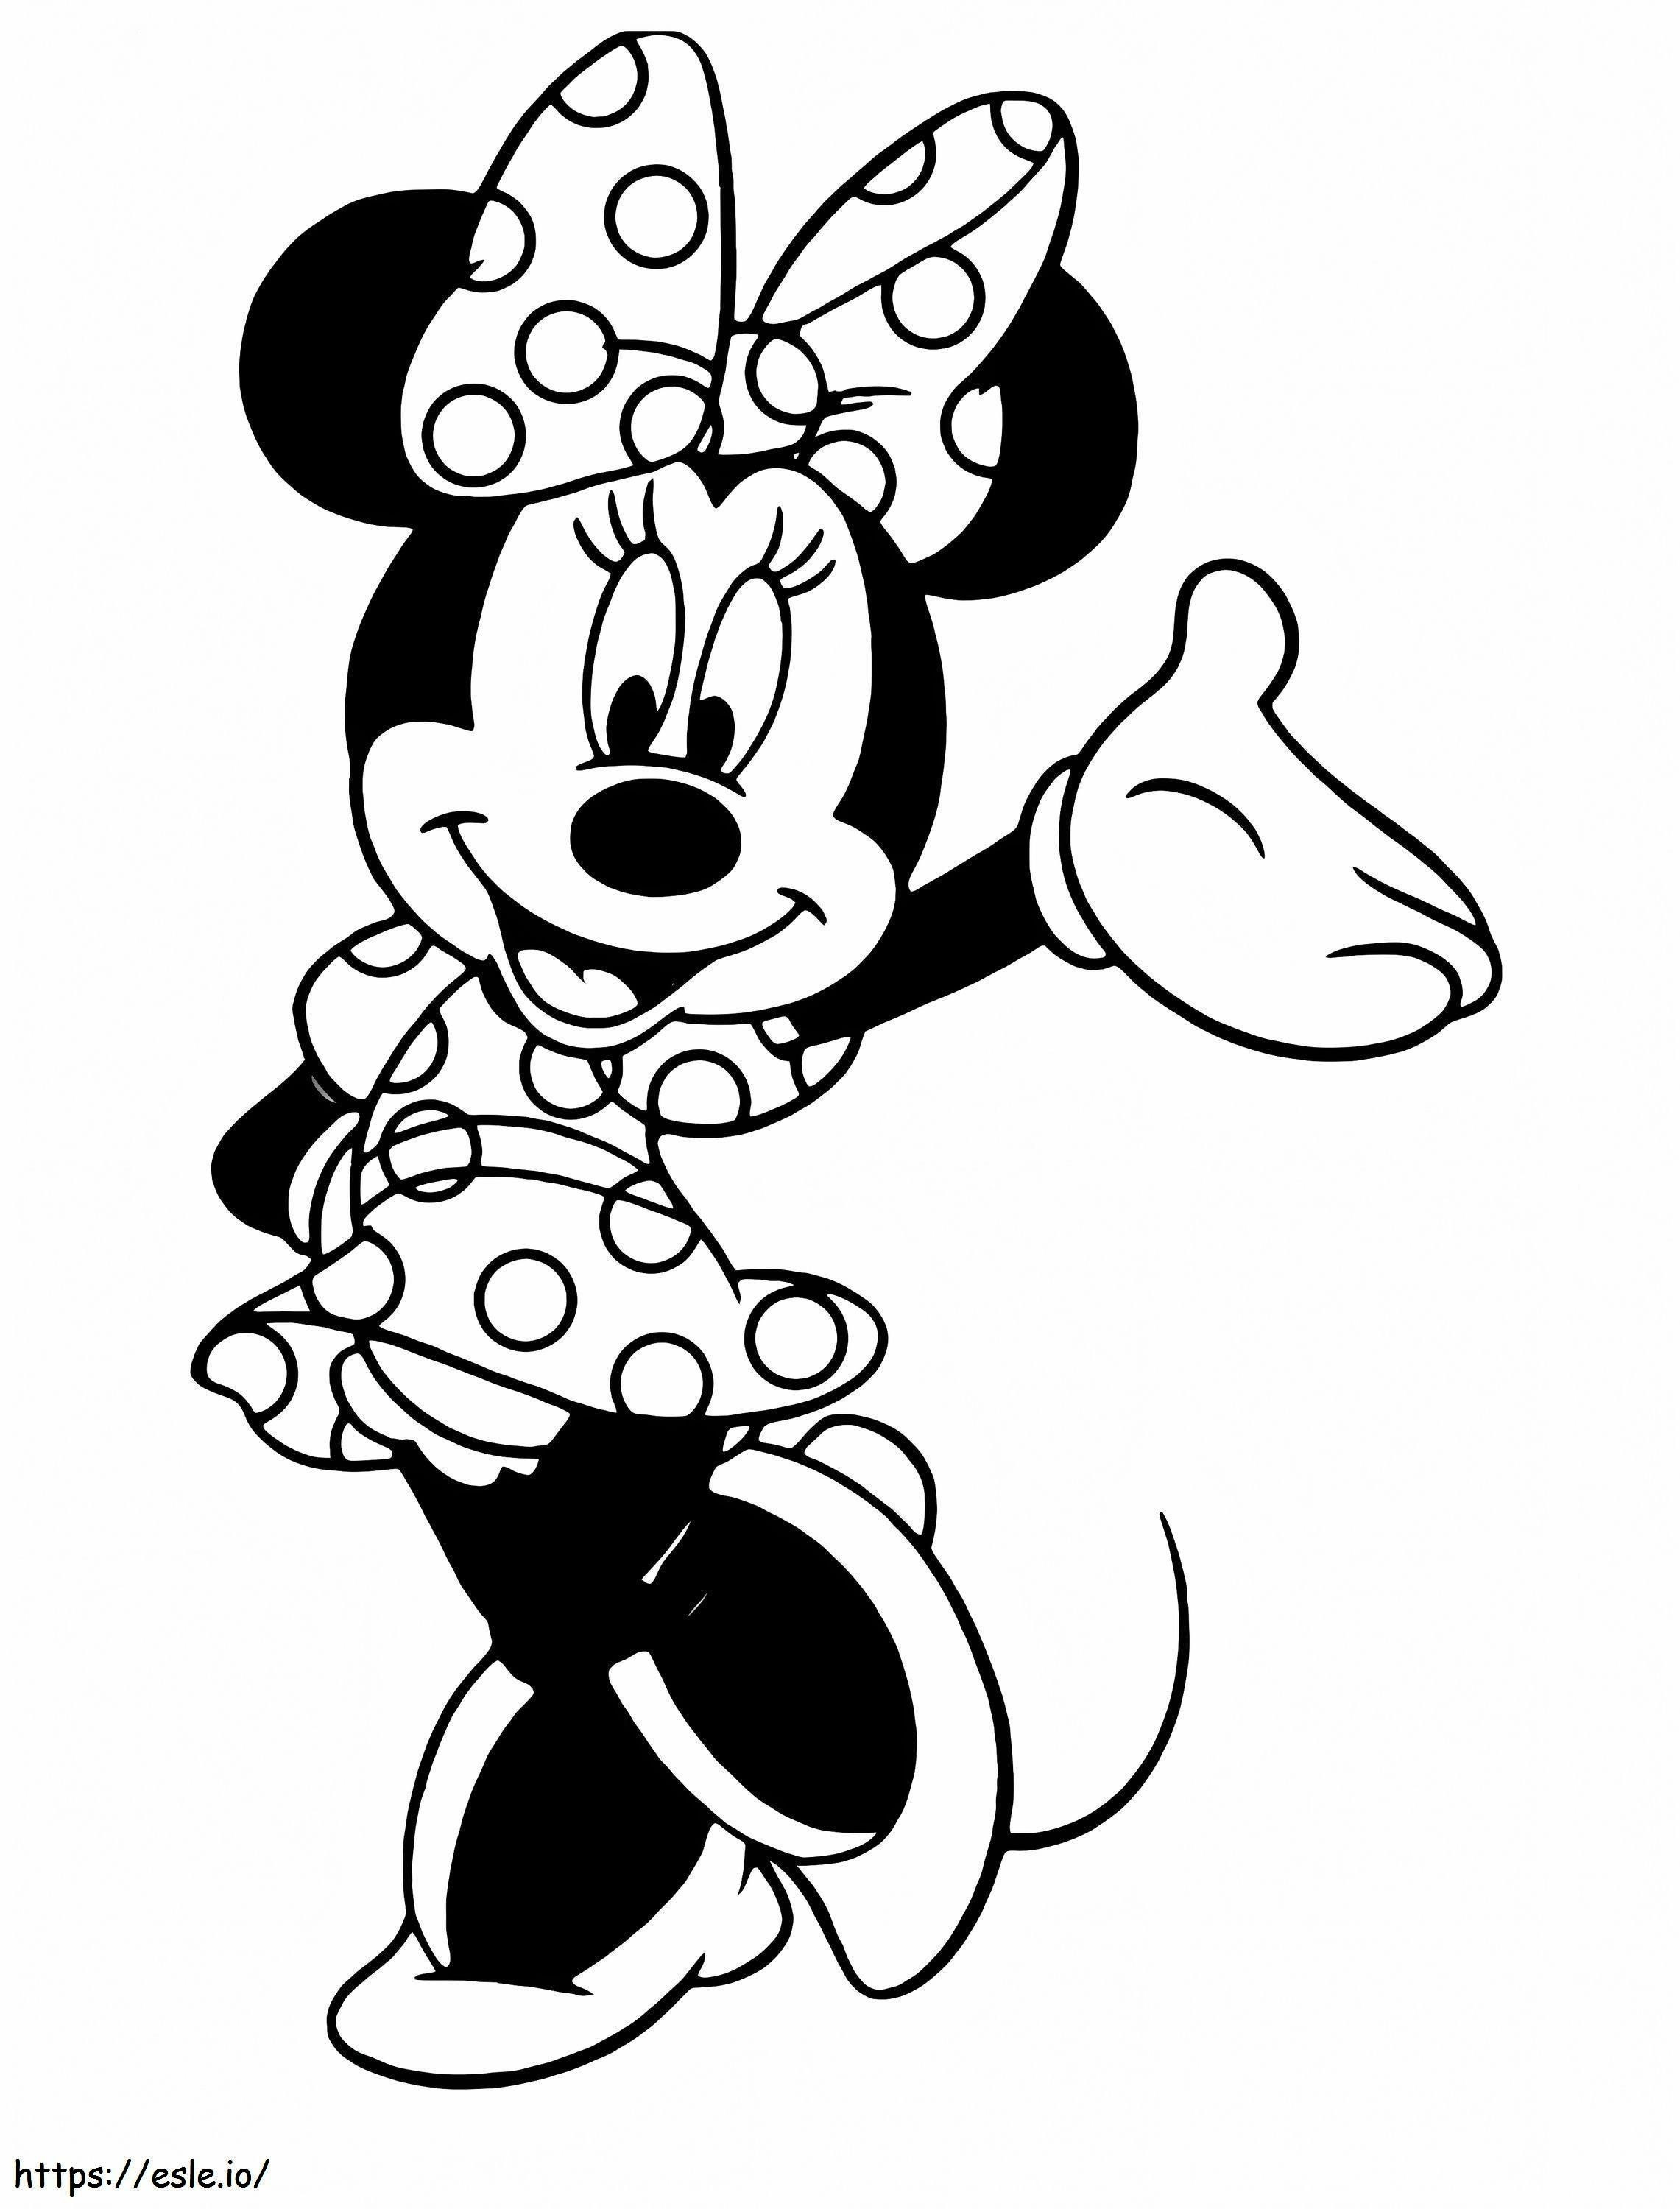 Fun Mouse Minnie coloring page